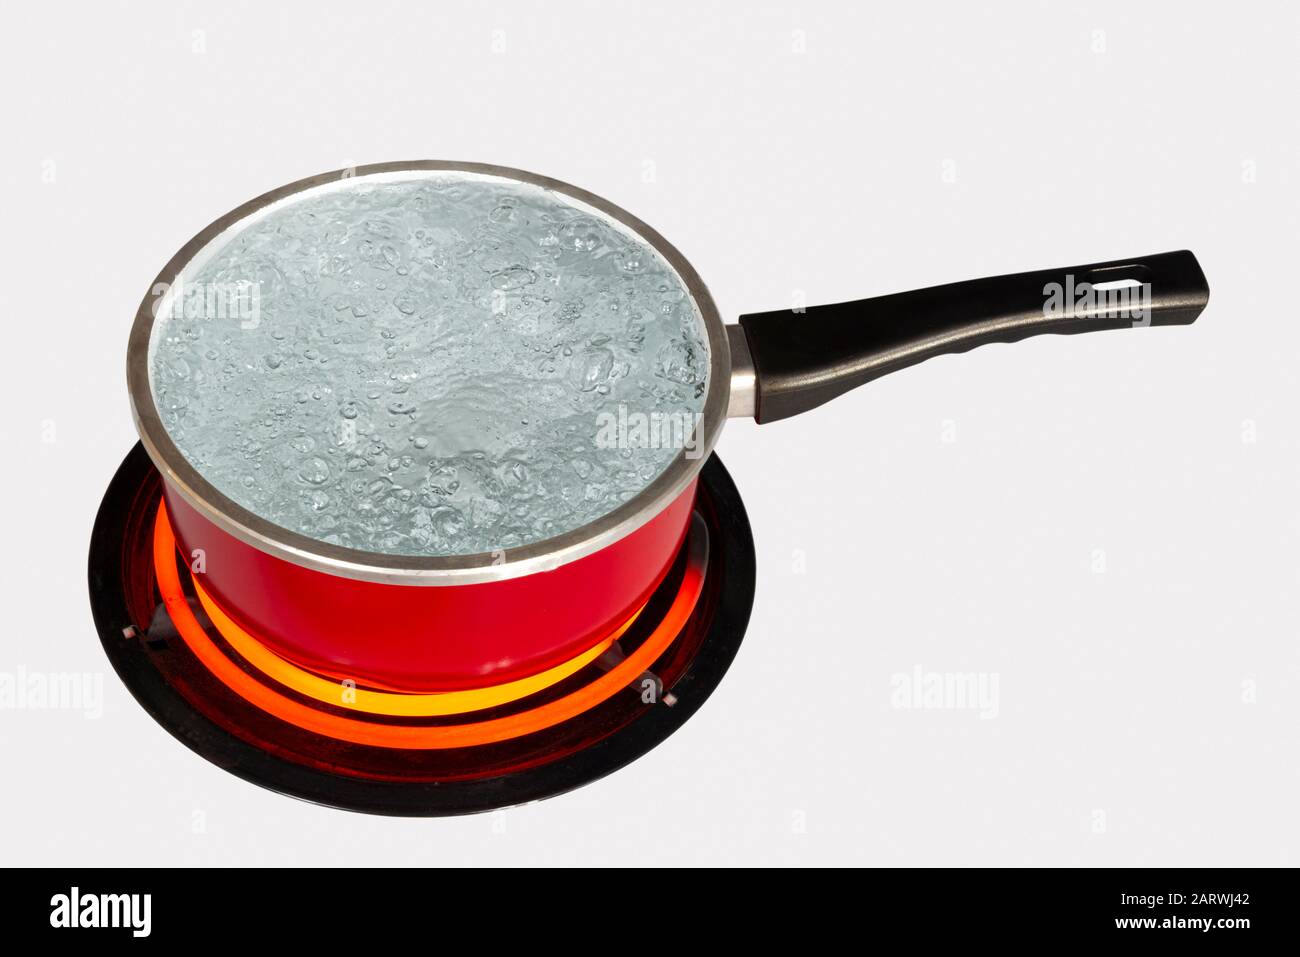 Horizontal shot looking down on a red pot of boiling water on top of a stove with the burner turned to high.  White background.  Copy space. Stock Photo